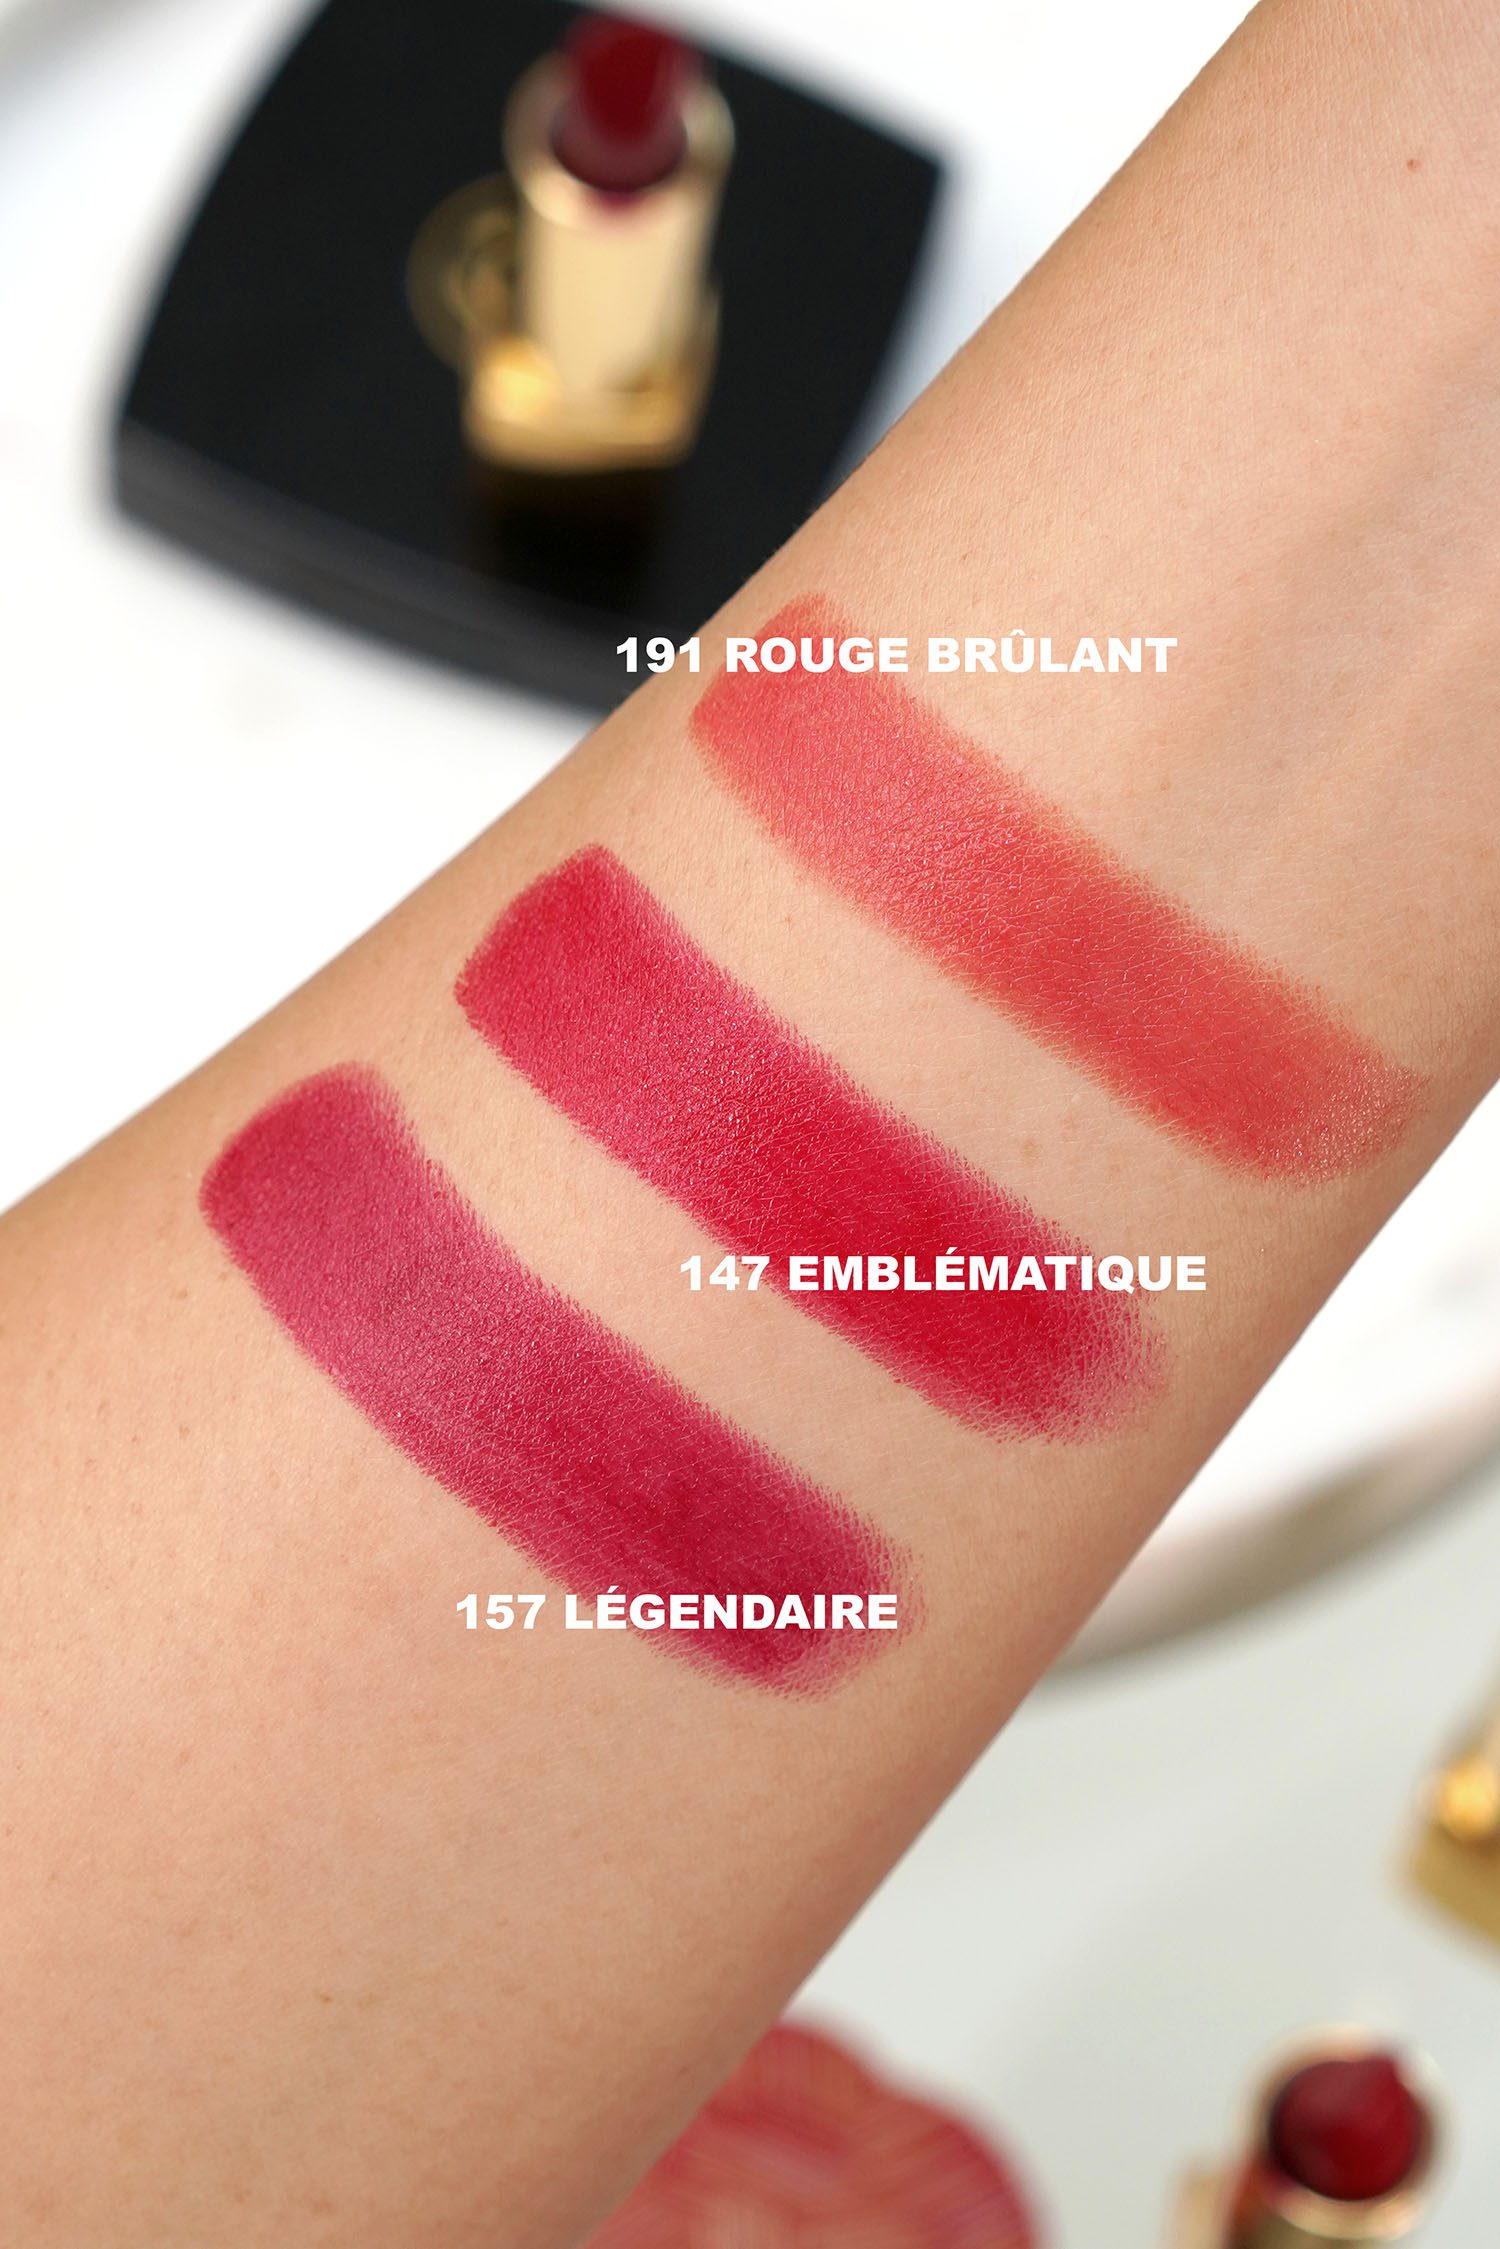 chanel rouge allure pirate